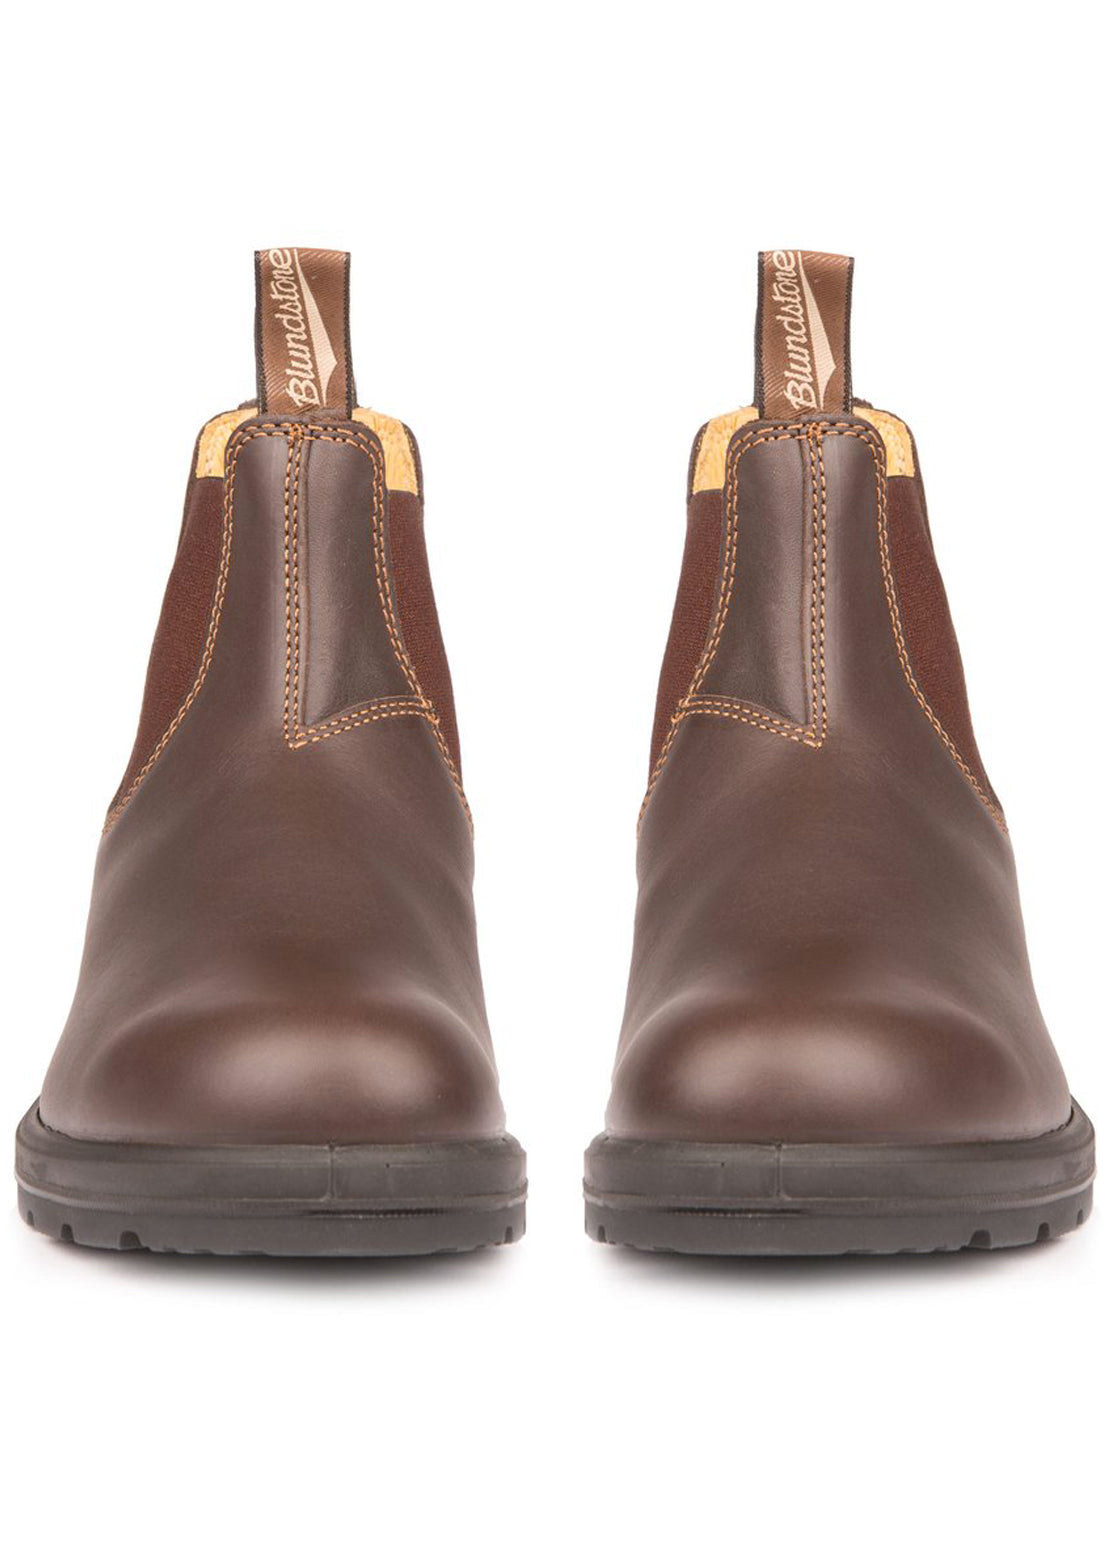 Blundstone 550 Leather Lined Boots (550) Walnut